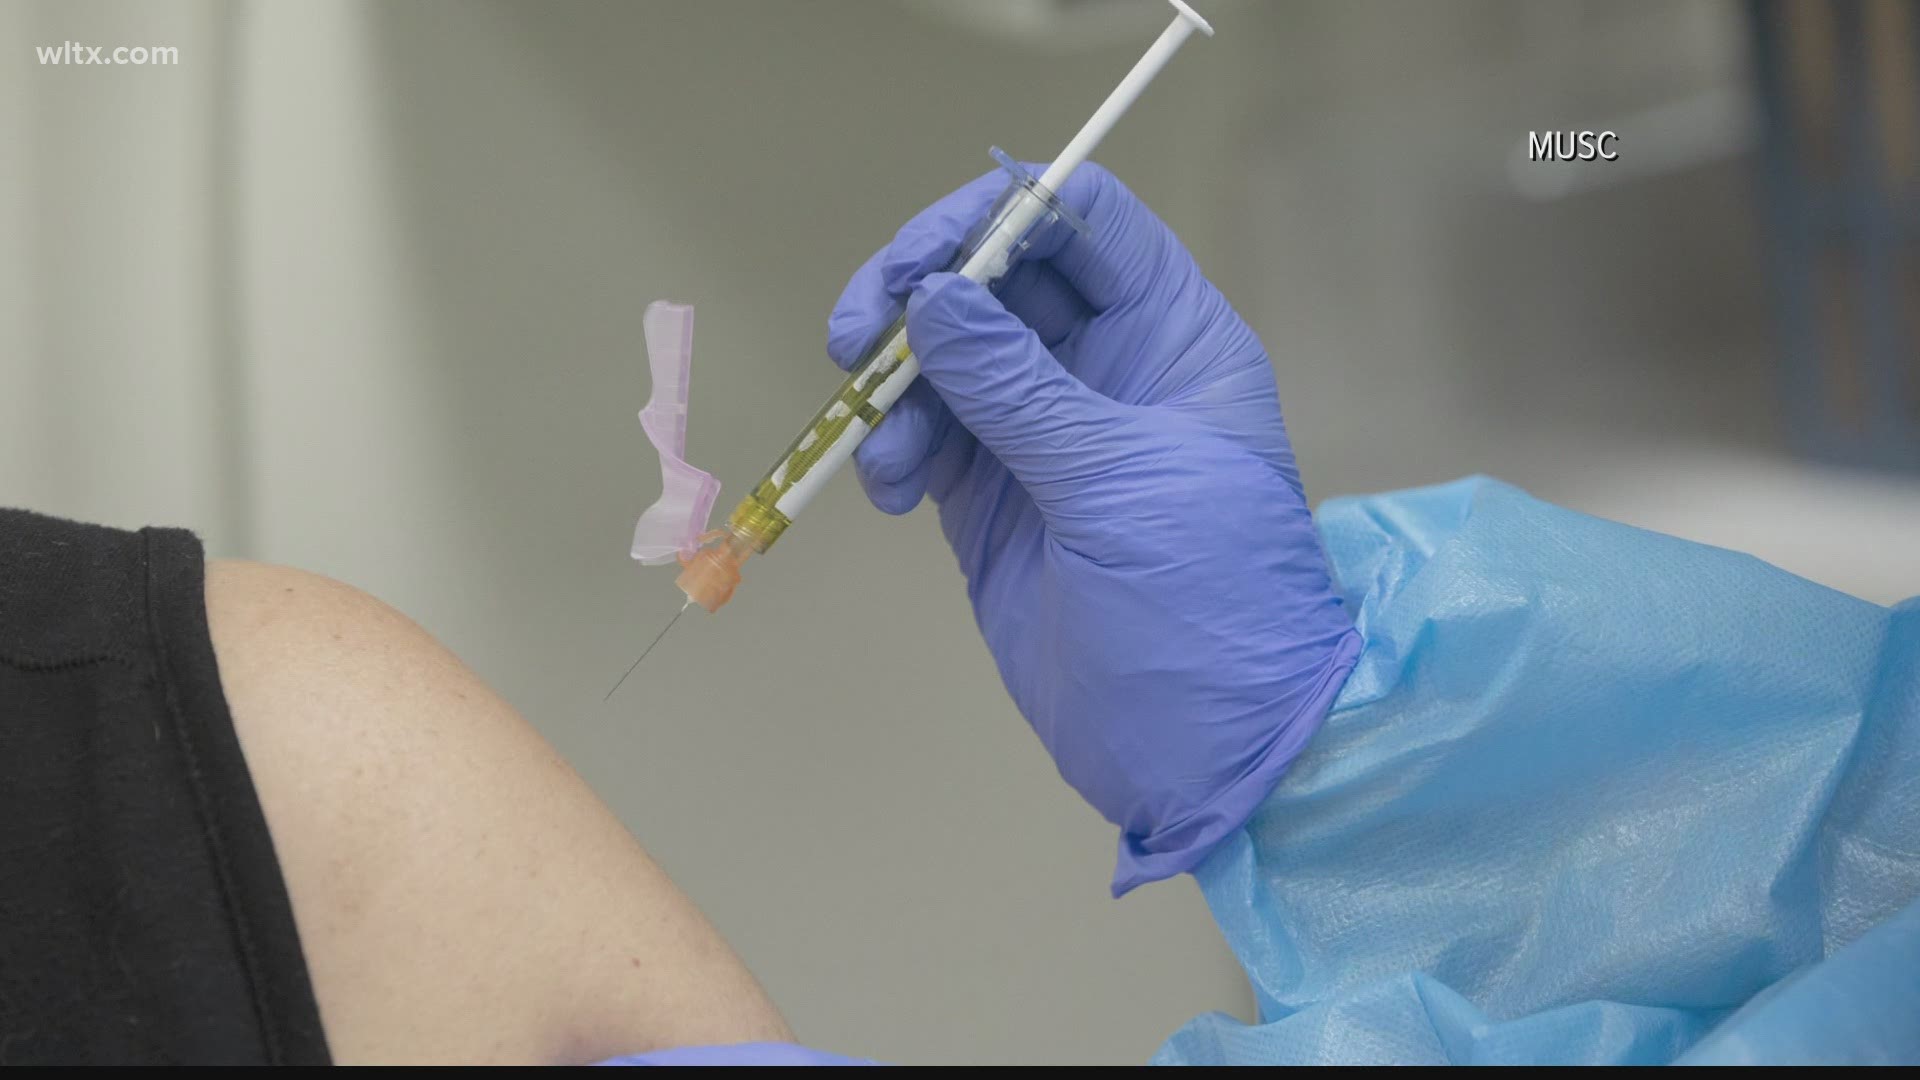 The Medical University of South Carolina is performing clinical trials of three potential vaccine options by companies AstraZeneca, Janssen and Novavax.